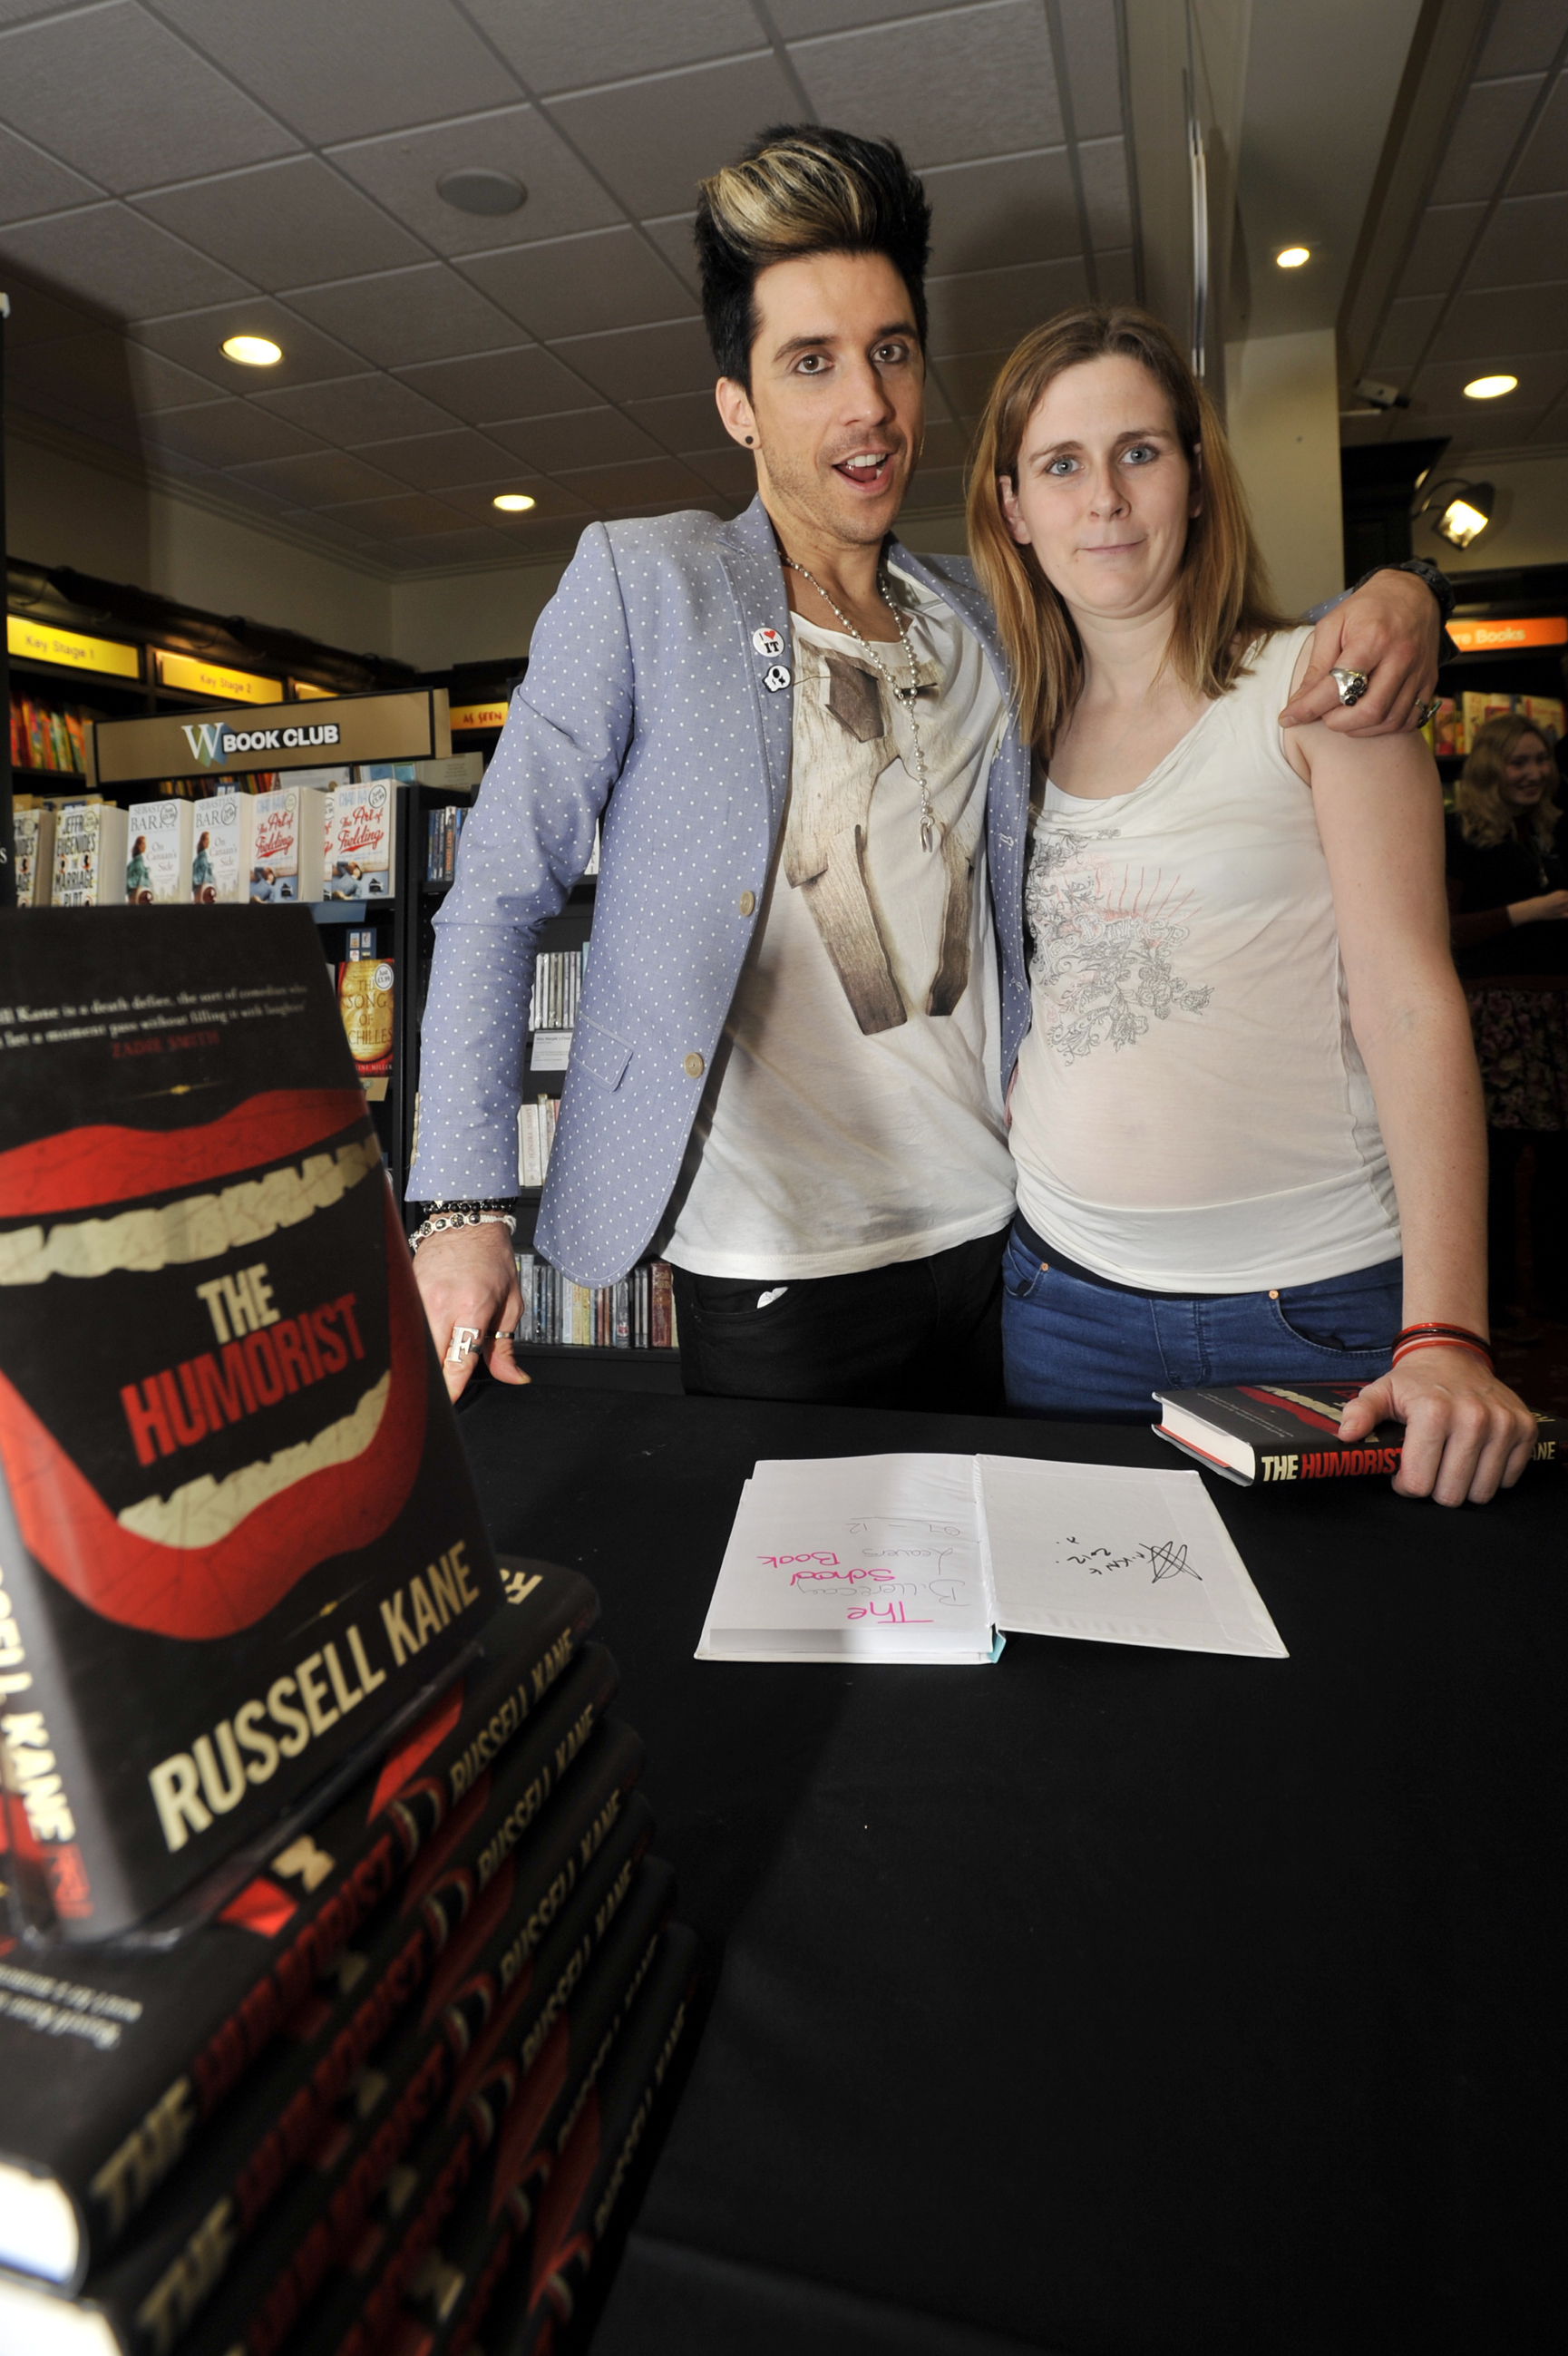 Time for a quick picture - Russell Kane meets the Billericay-based Kelly Featherstone during a book signing in Southend